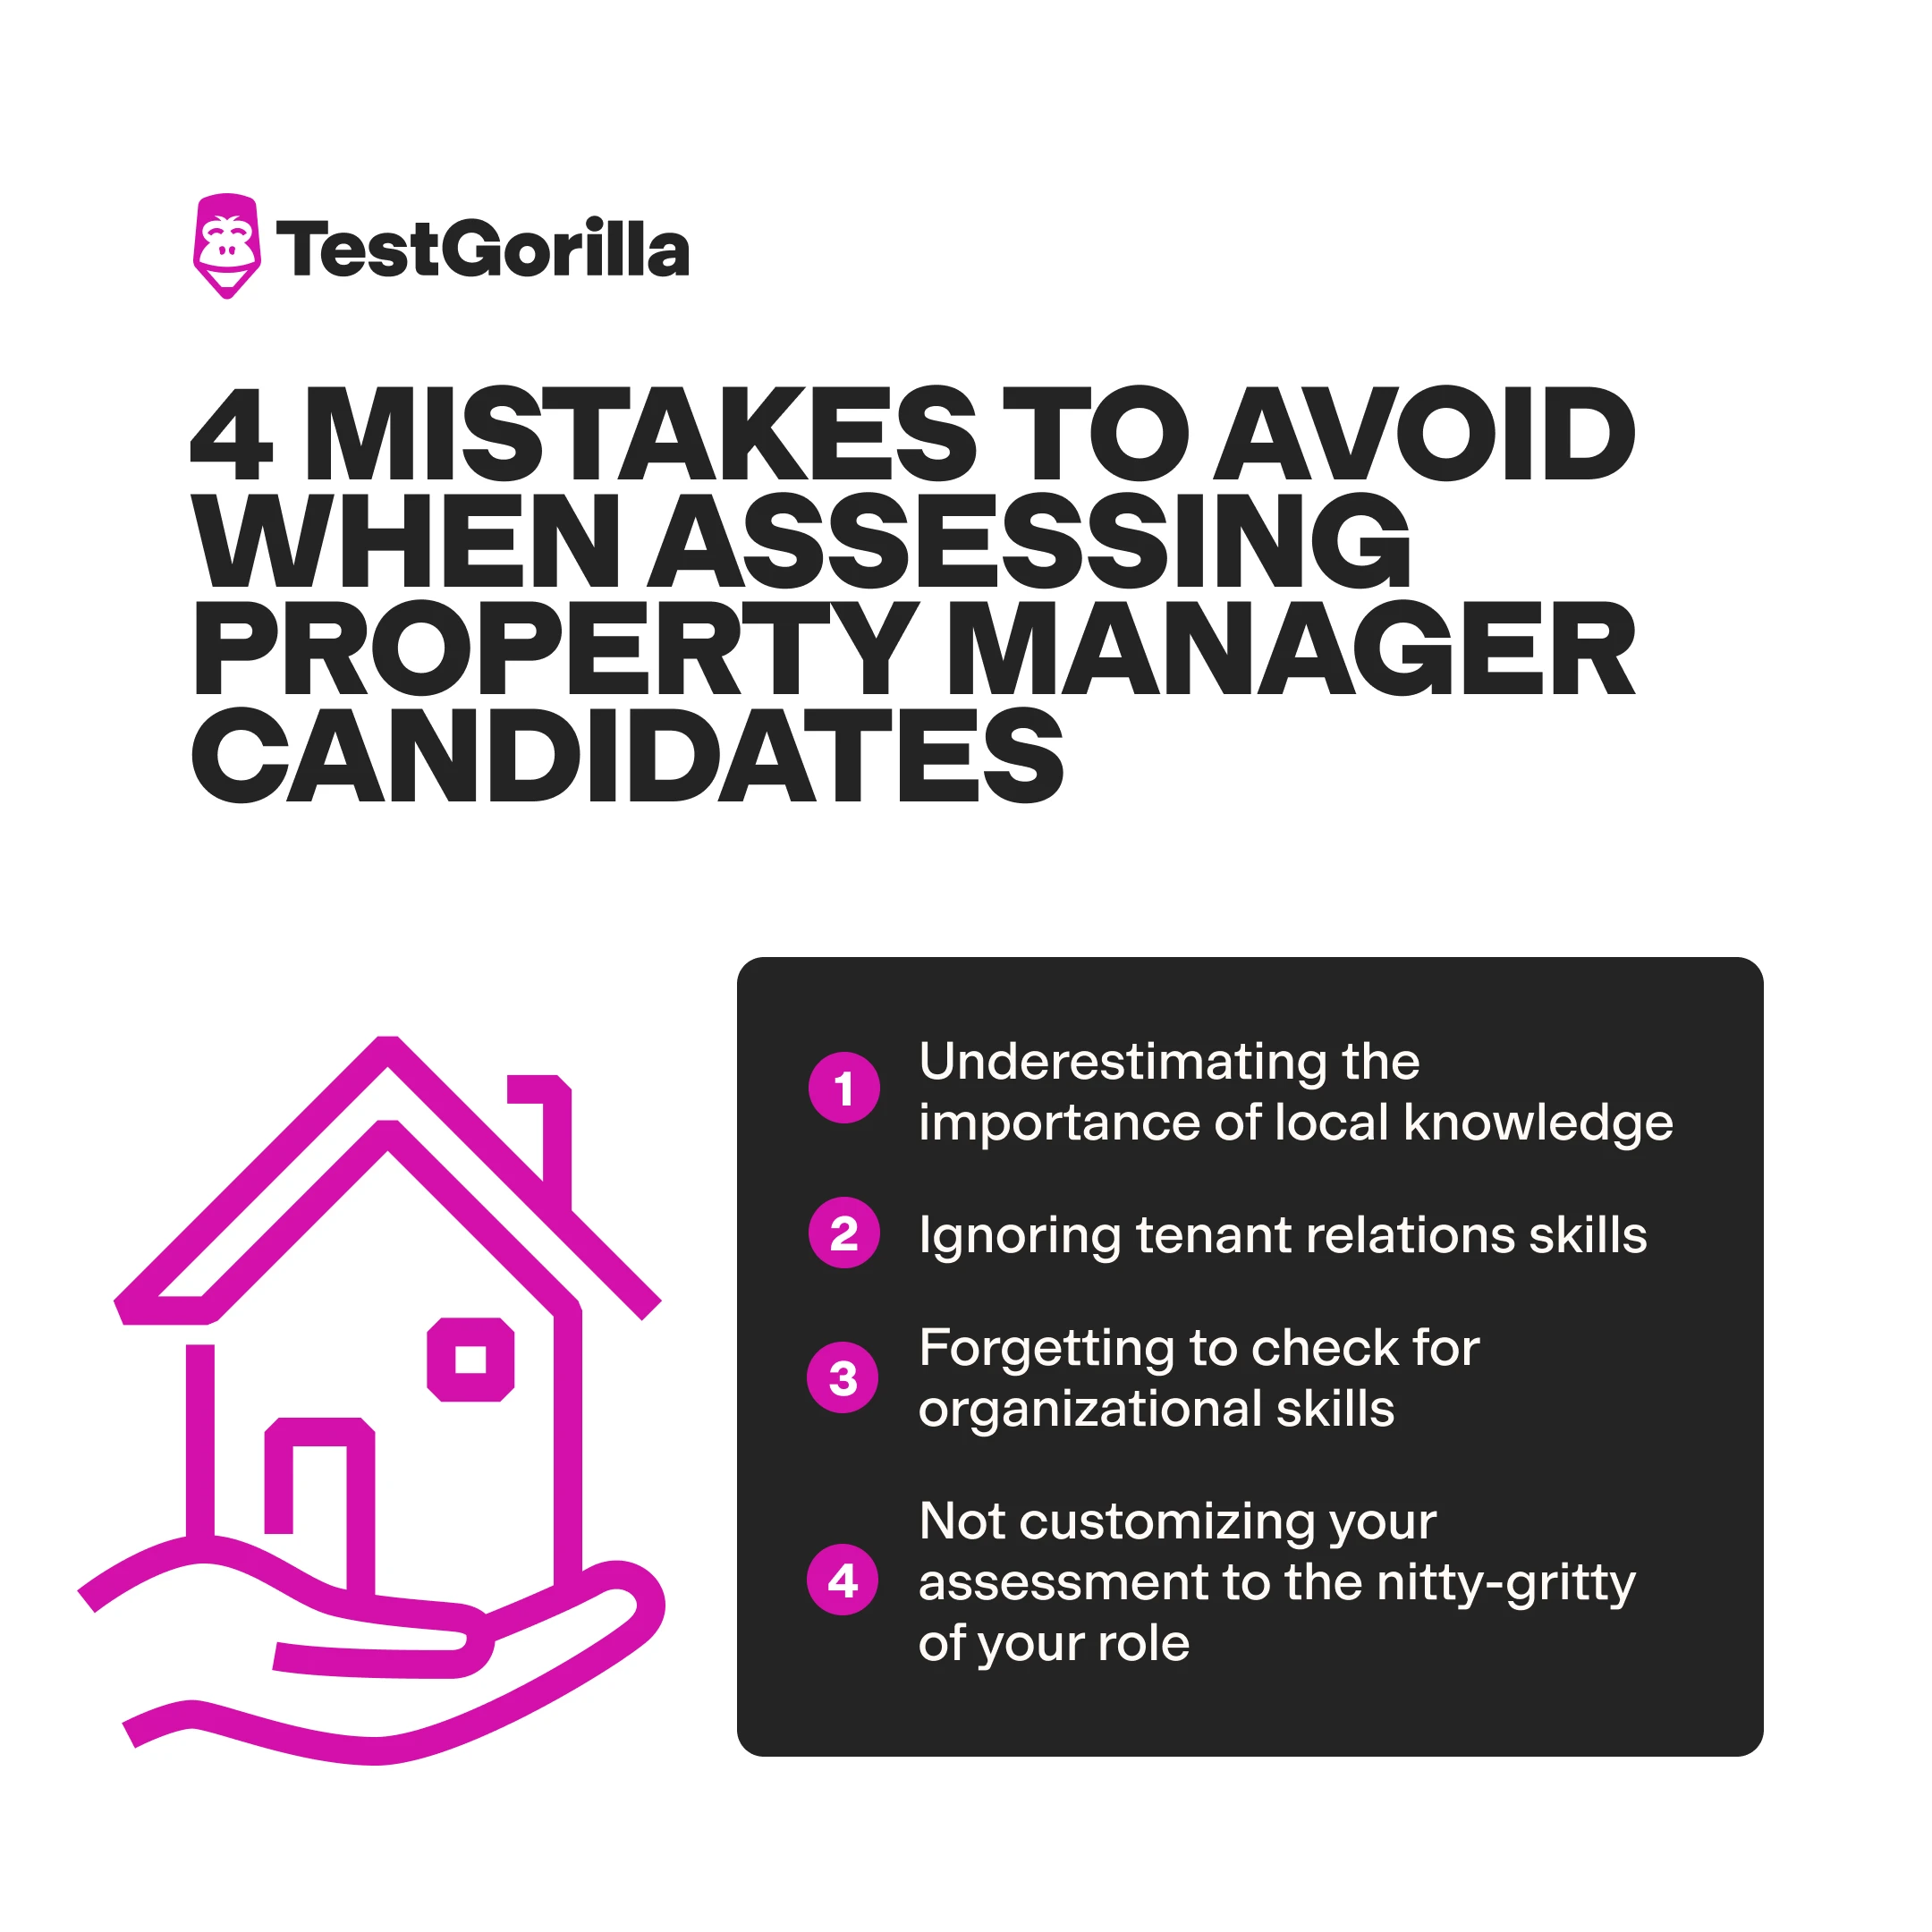 4 mistakes to avoid when assessing property manager candidates graphic